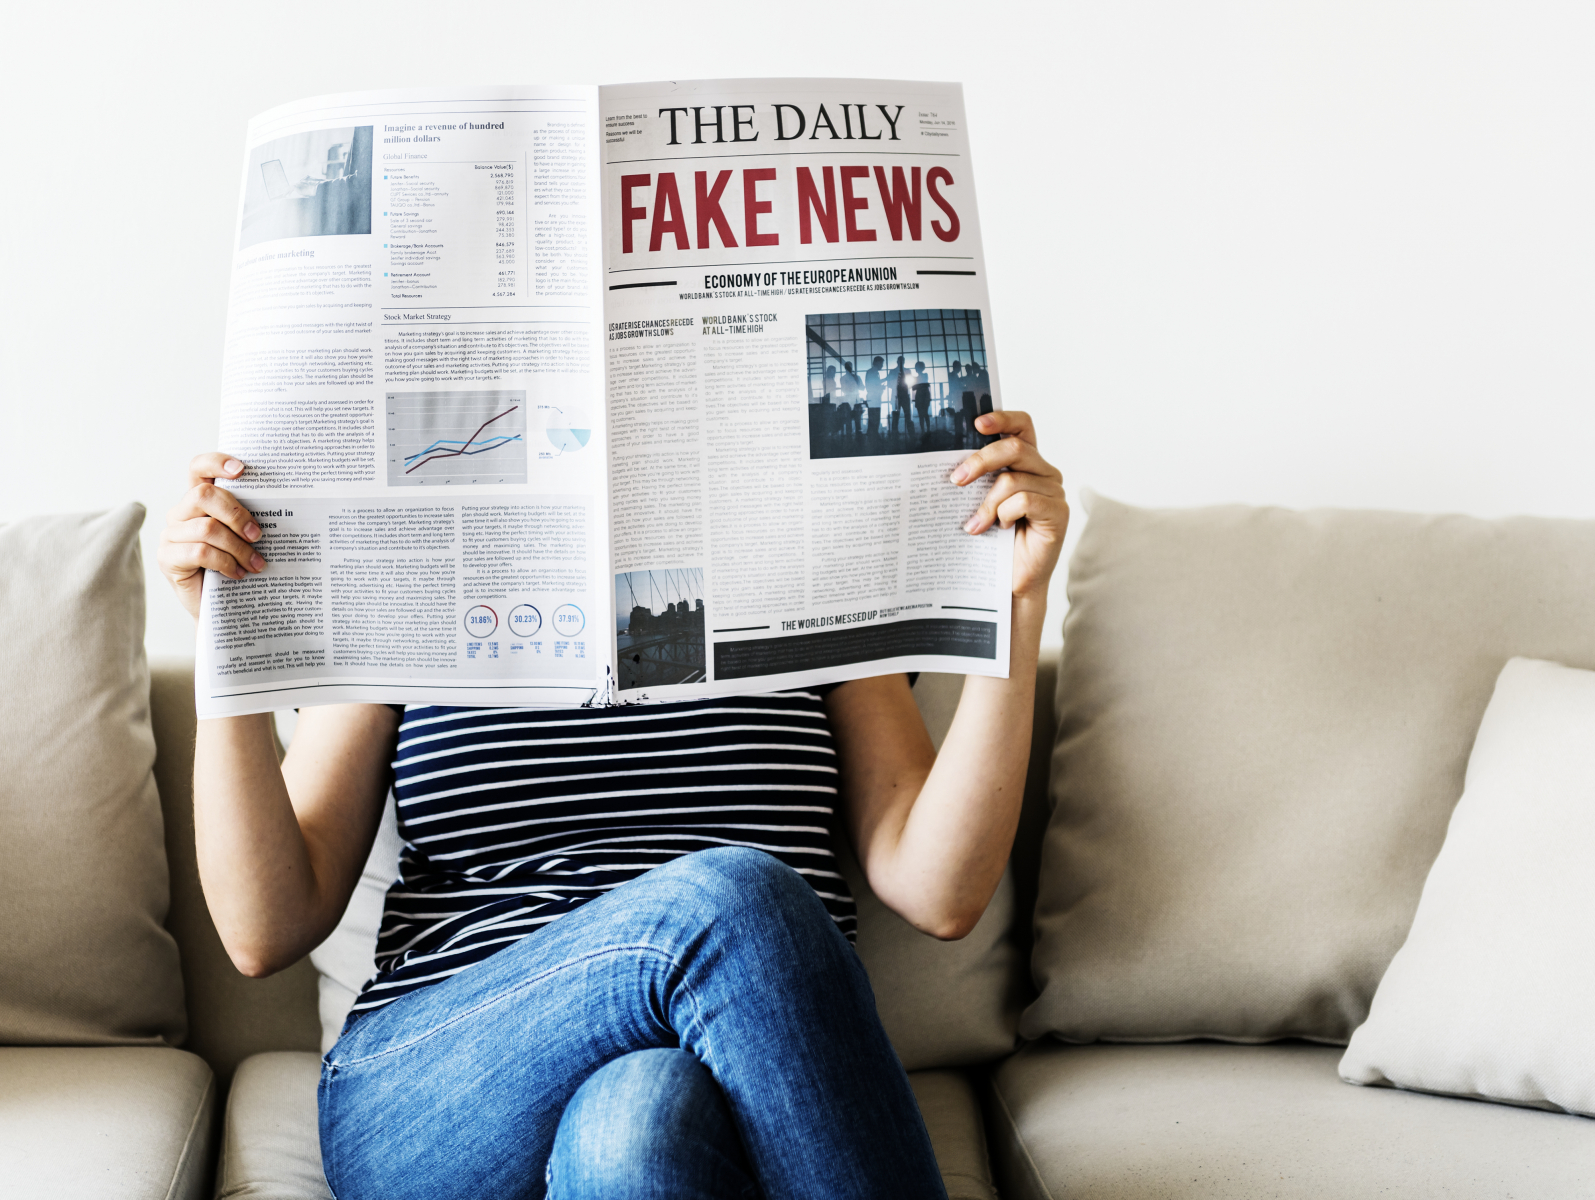 Blame baby boomers for fake news on Facebook